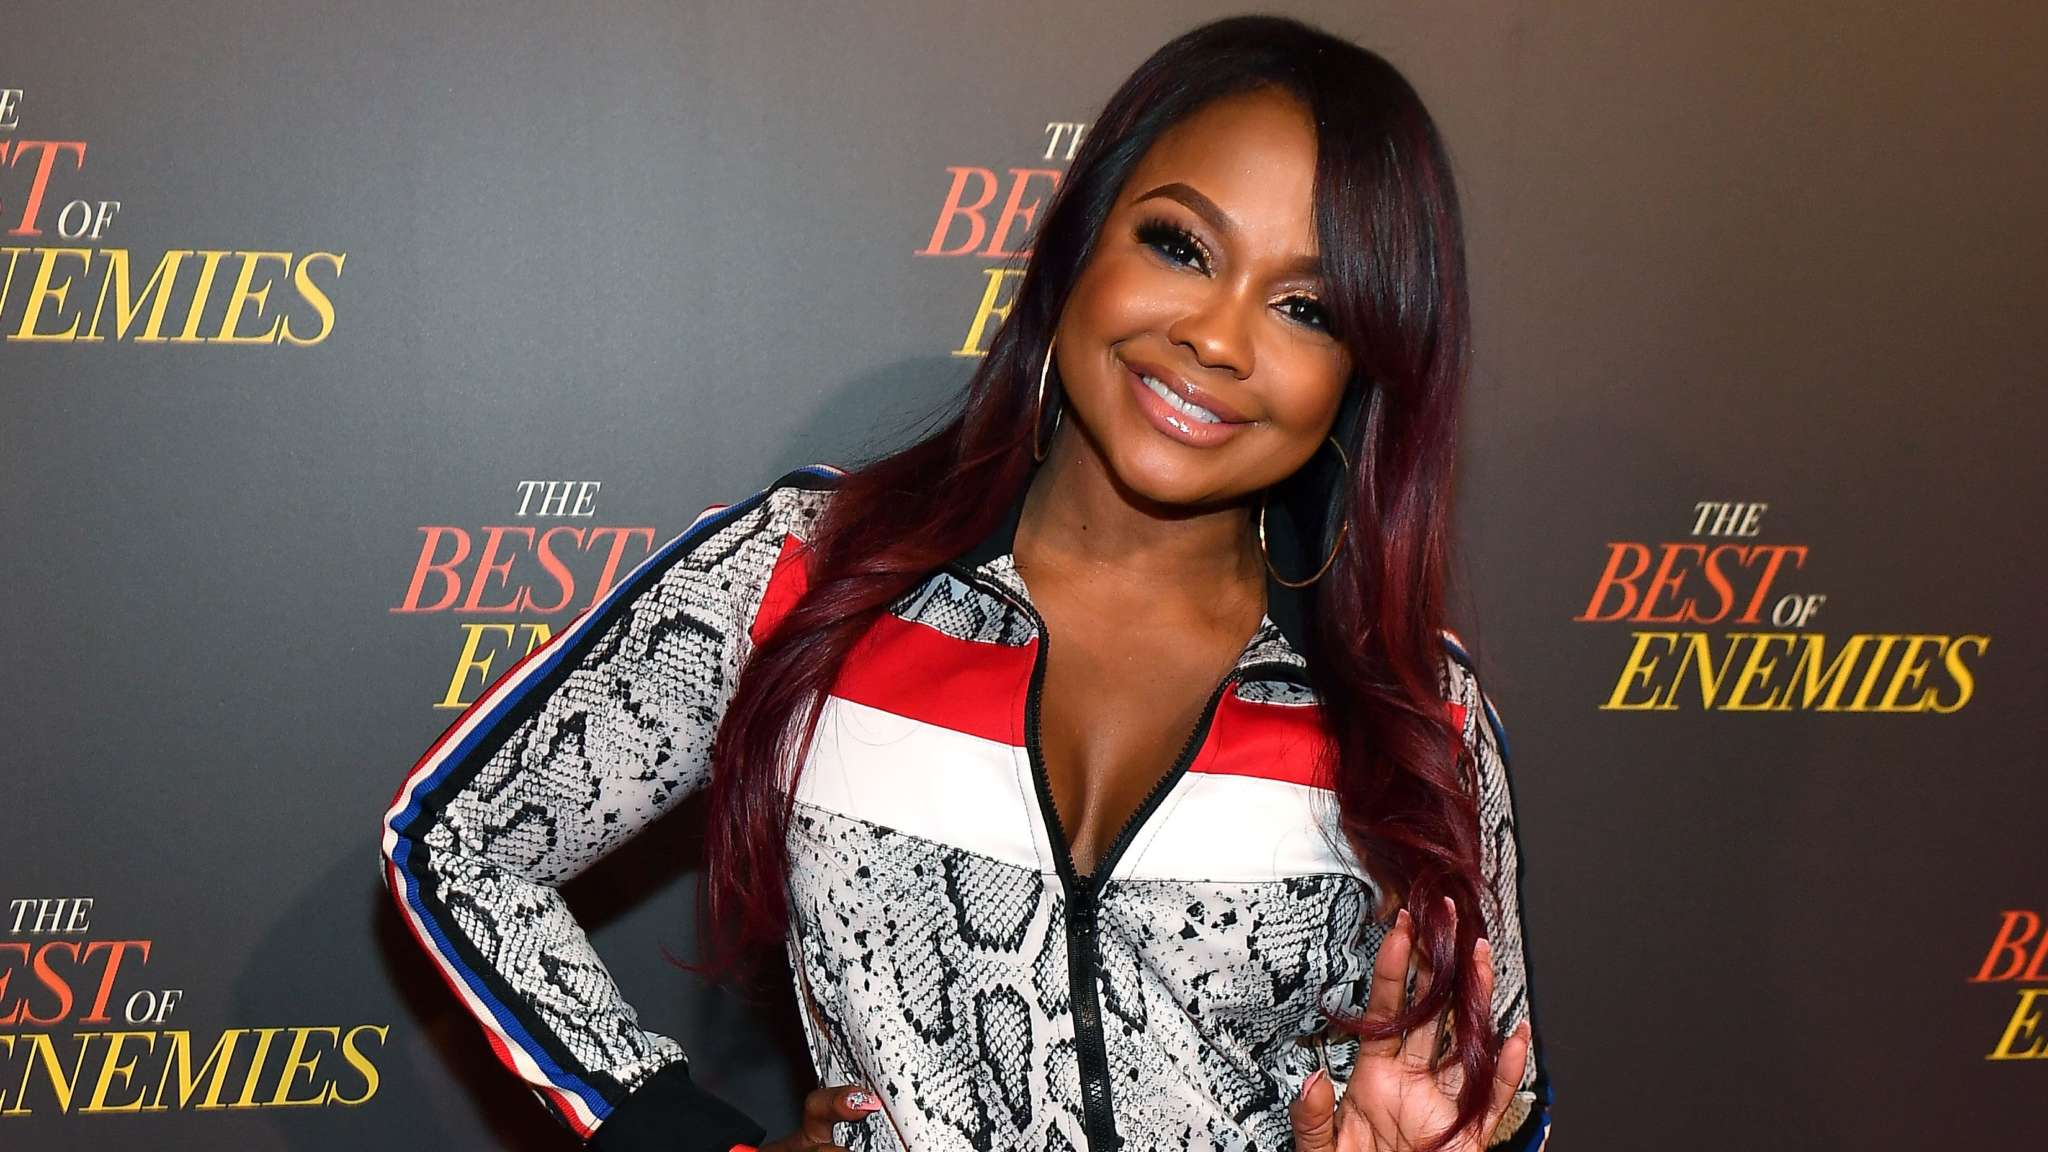 Phaedra Parks Praises Her Sons, Brothers And Dad - Check Out Her Strong Message